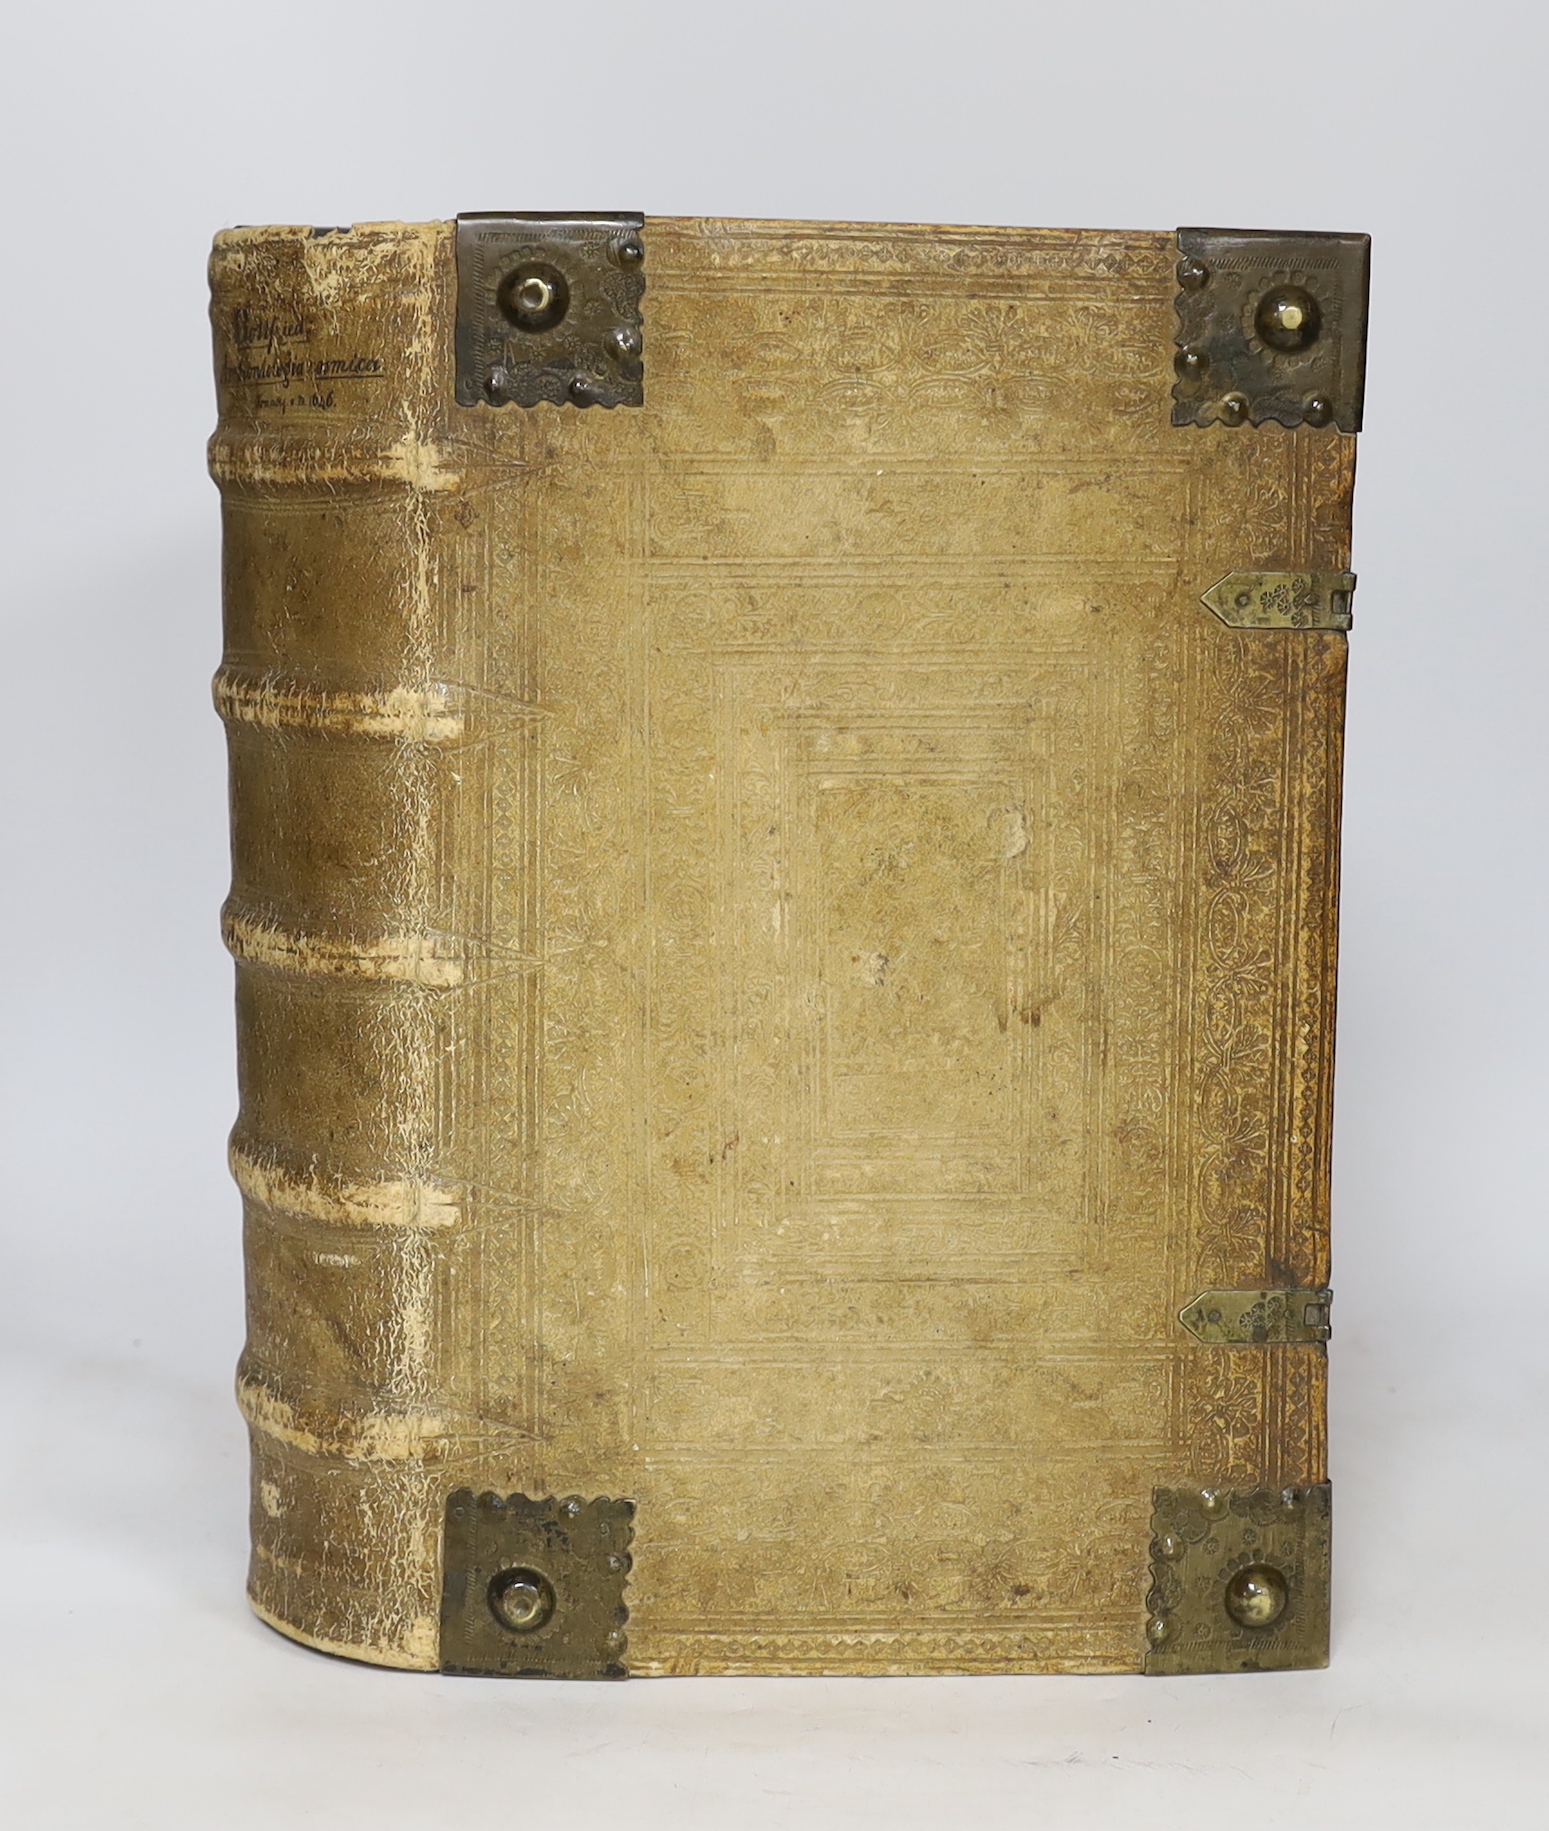 A large leather bound volume: Archonto-Logica Cosmically 1646